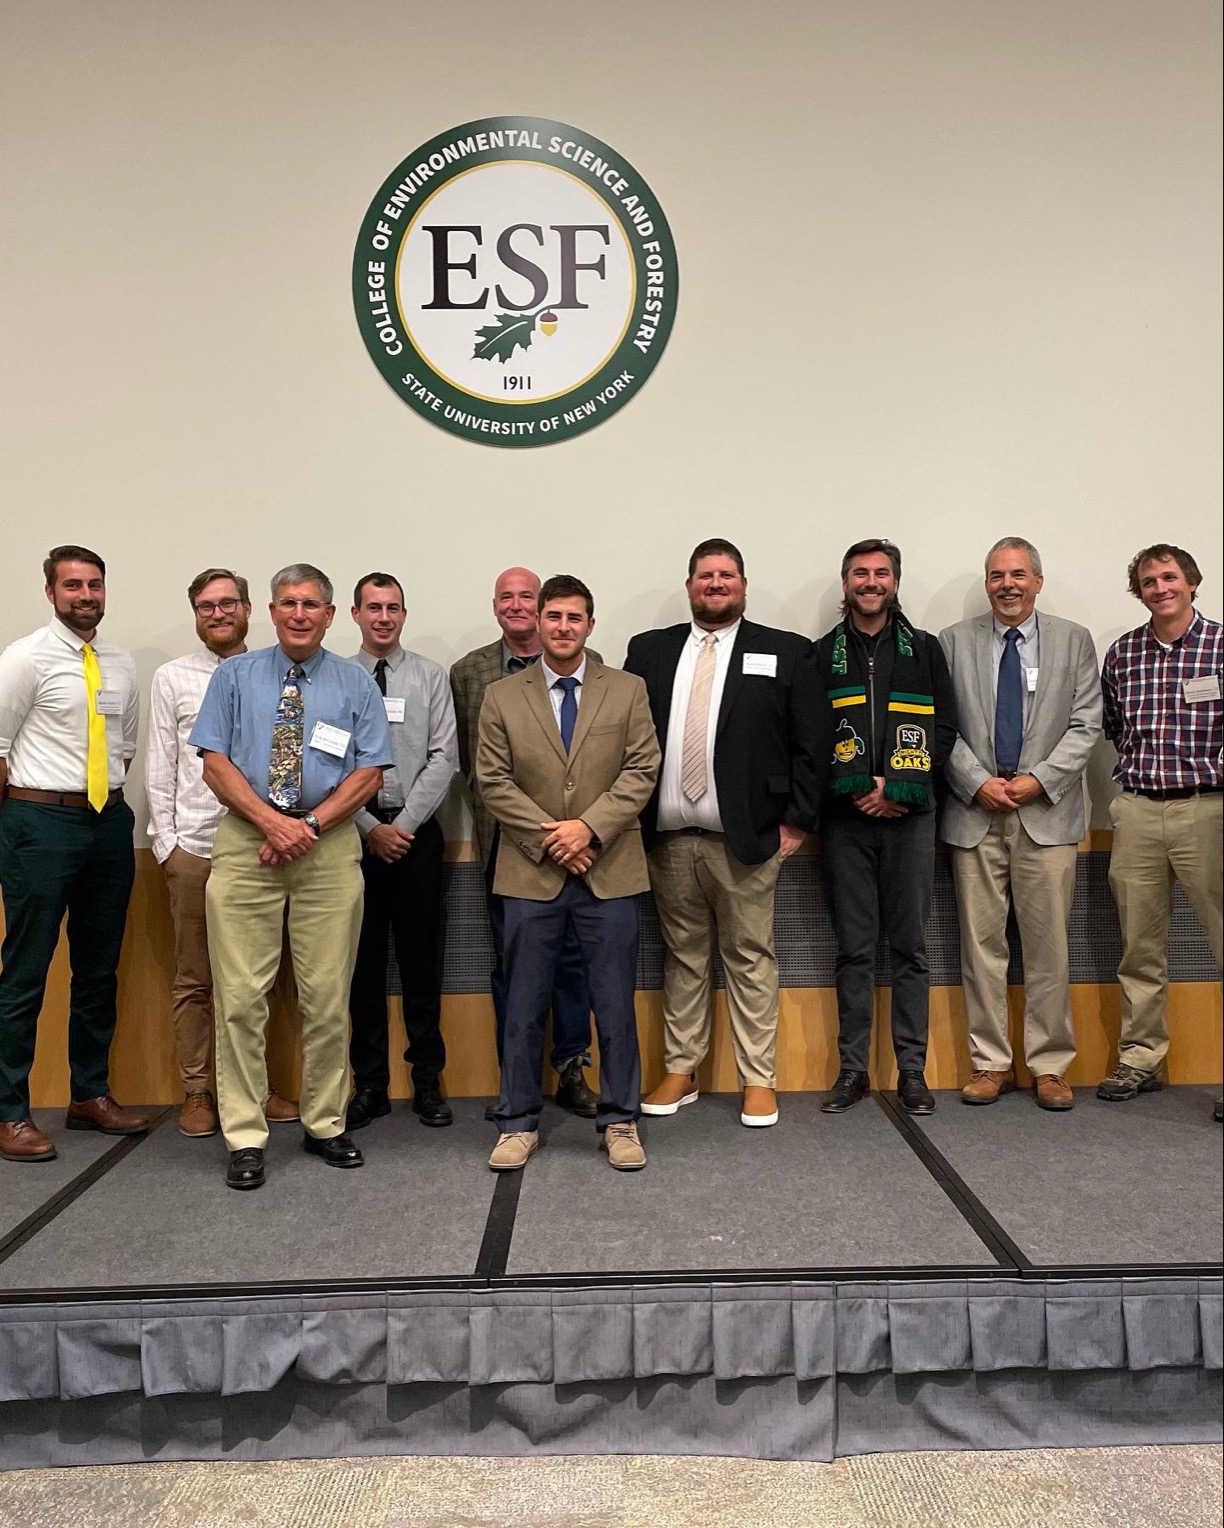 2022 Honorees of the E S F Athletic Hall of Fame